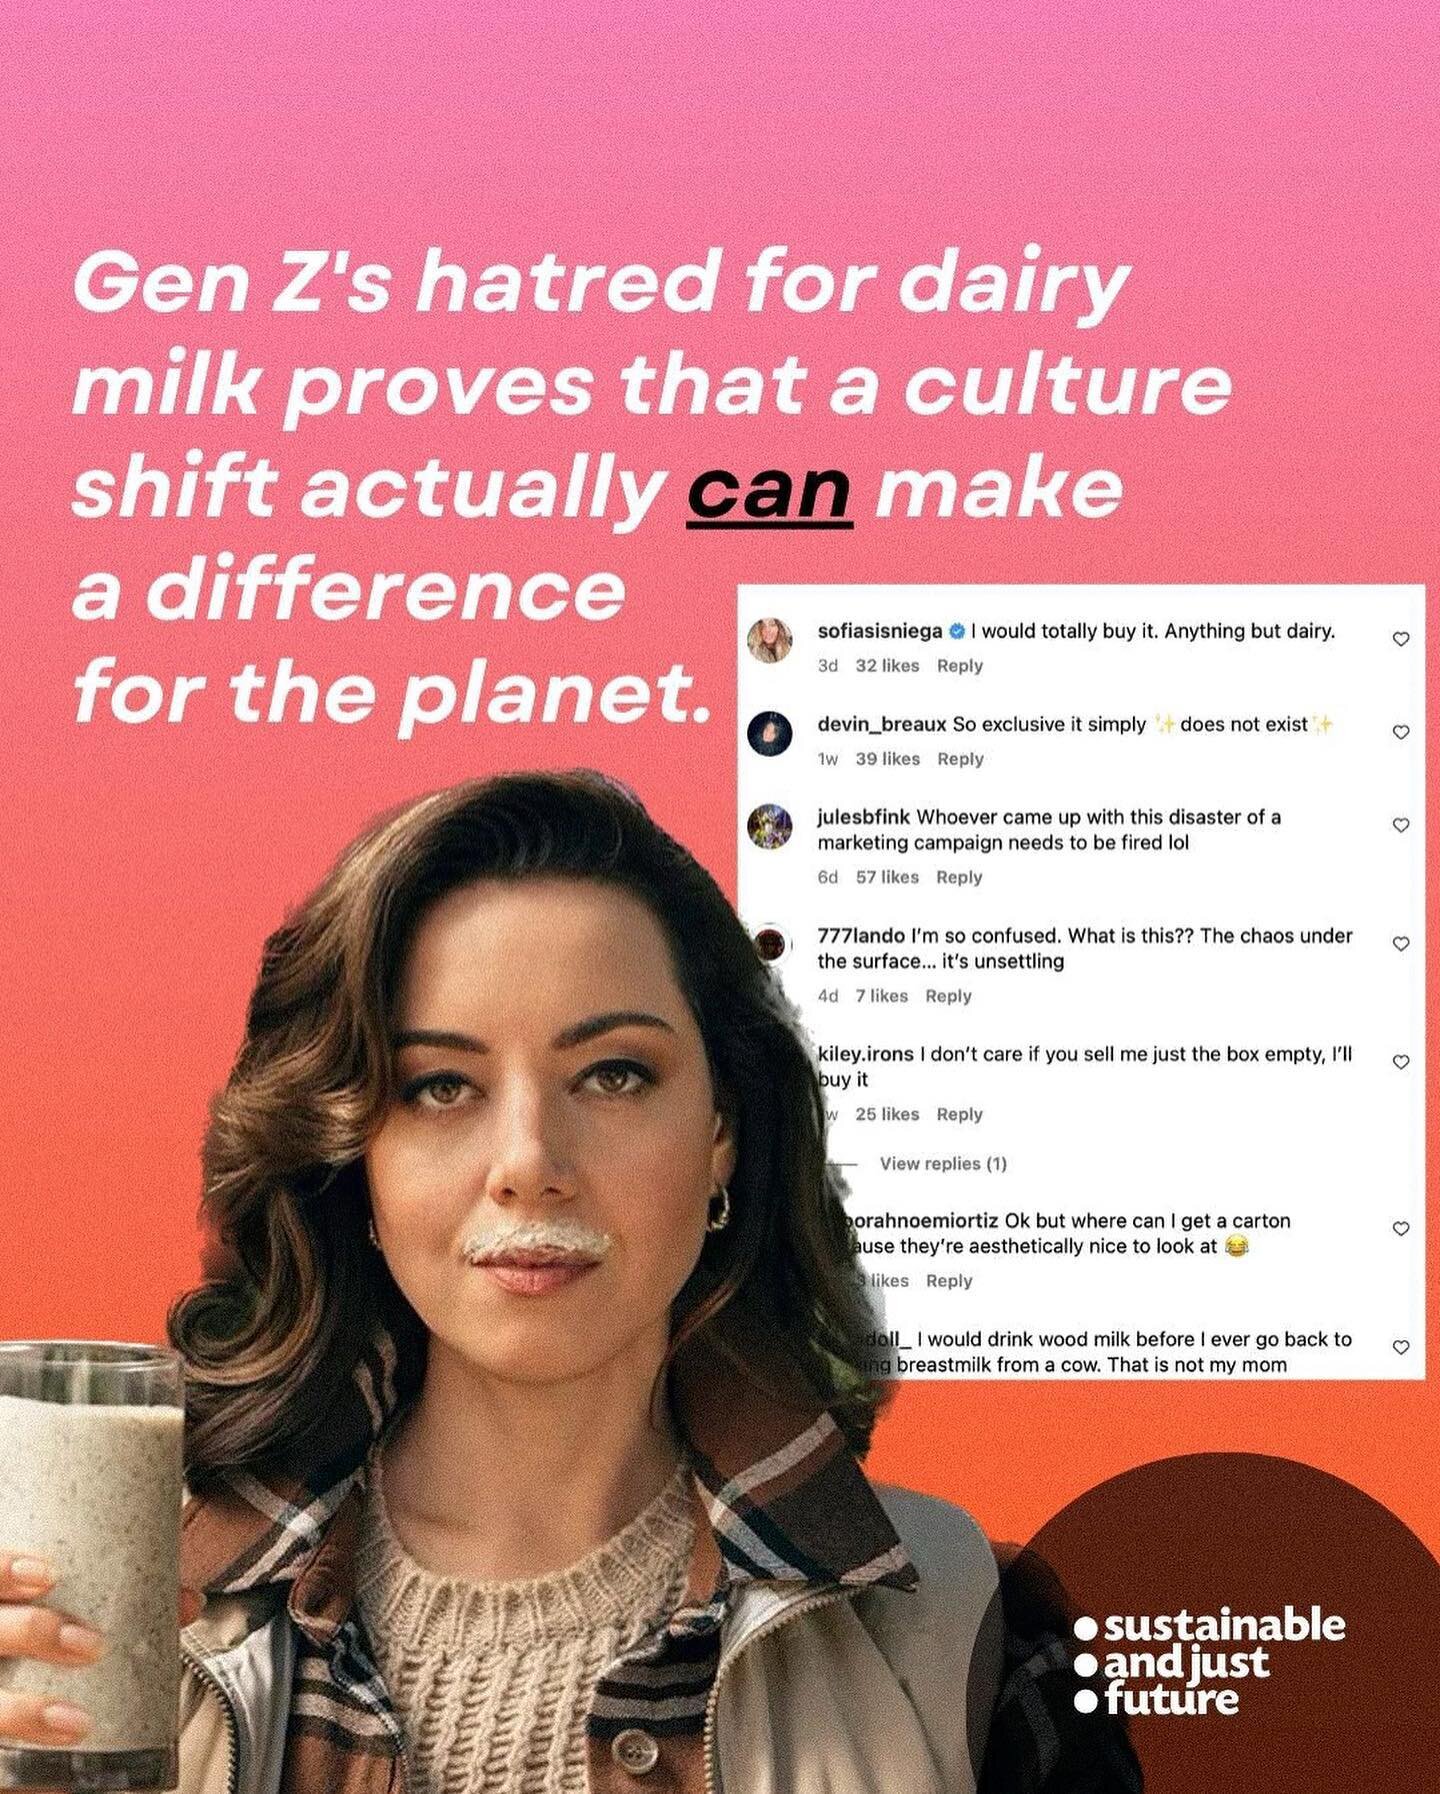 keep swiping for a deep-fried meme

if you didn&rsquo;t see Aubrey Plaza&lsquo;s ad for the dairy industry, it was like this whole joke about a new milk made out of wood and then she was like, &ldquo;just kidding, only real milk is real&rdquo;. dunno